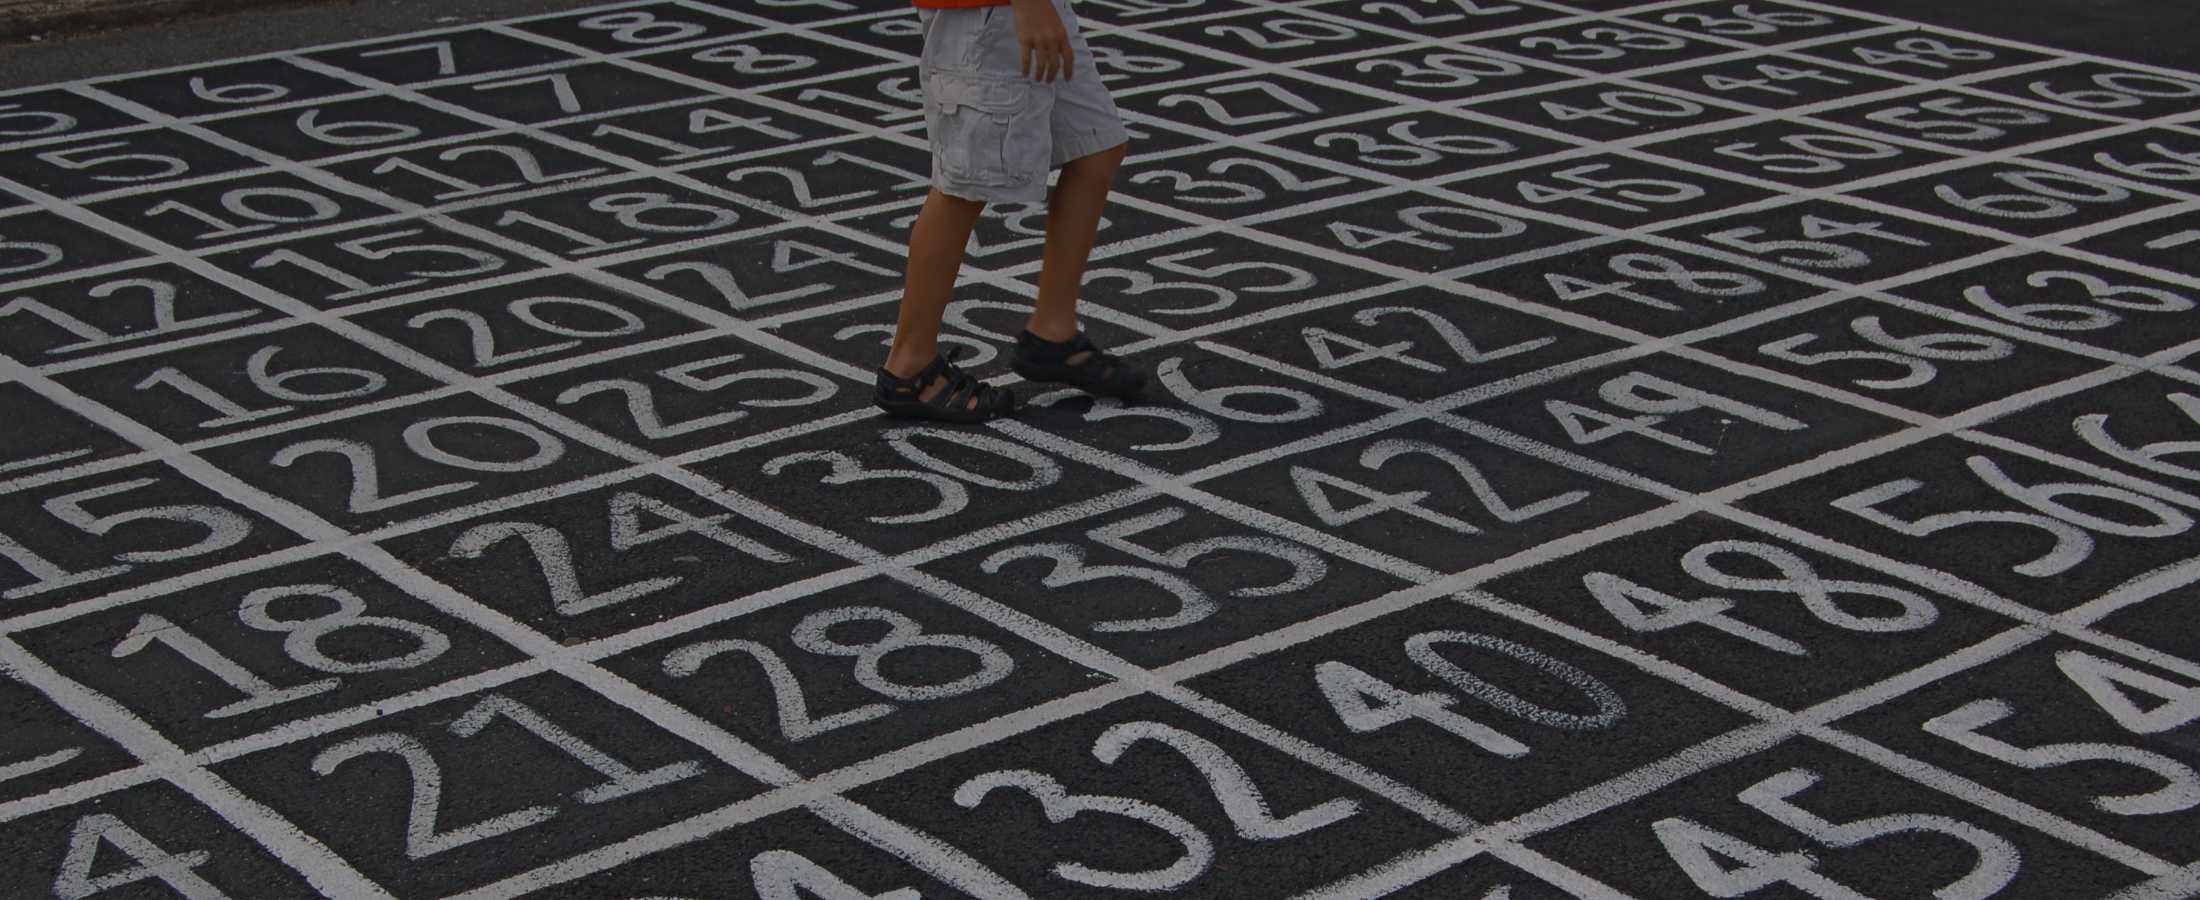 A child standing on numbers painted on the ground